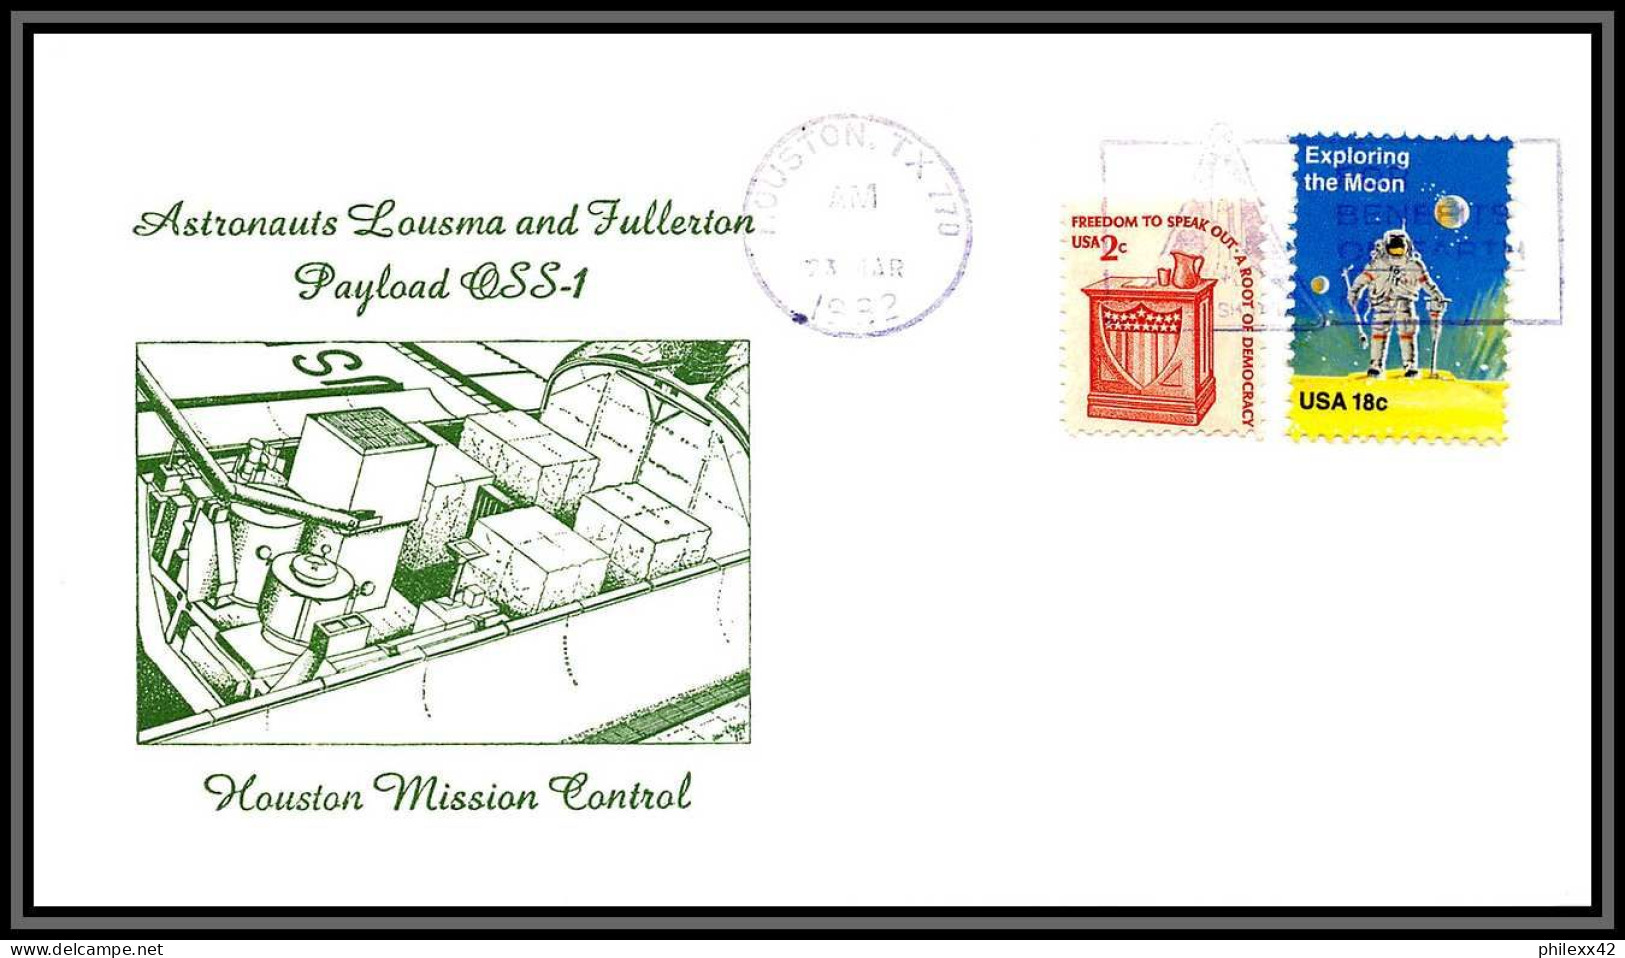 2889 Espace (space Raumfahrt) Lettre (cover Briefe) USA Sts-3 Payload Columbia Shuttle (navette) 23/3/1982 - Estados Unidos